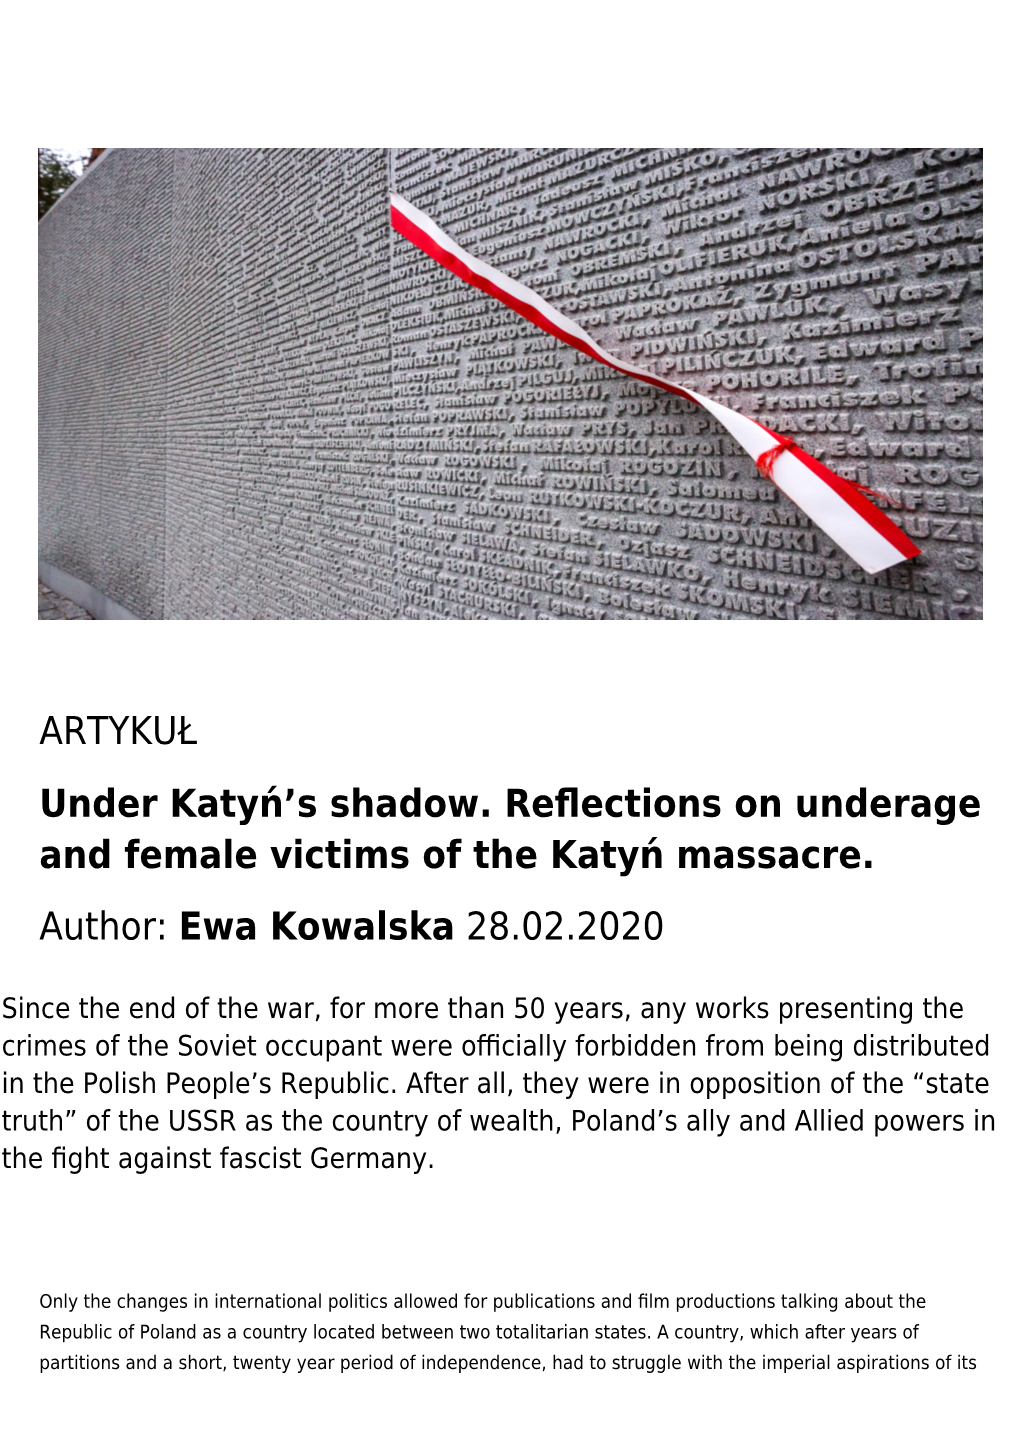 ARTYKUŁ Under Katyń's Shadow. Reflections on Underage And